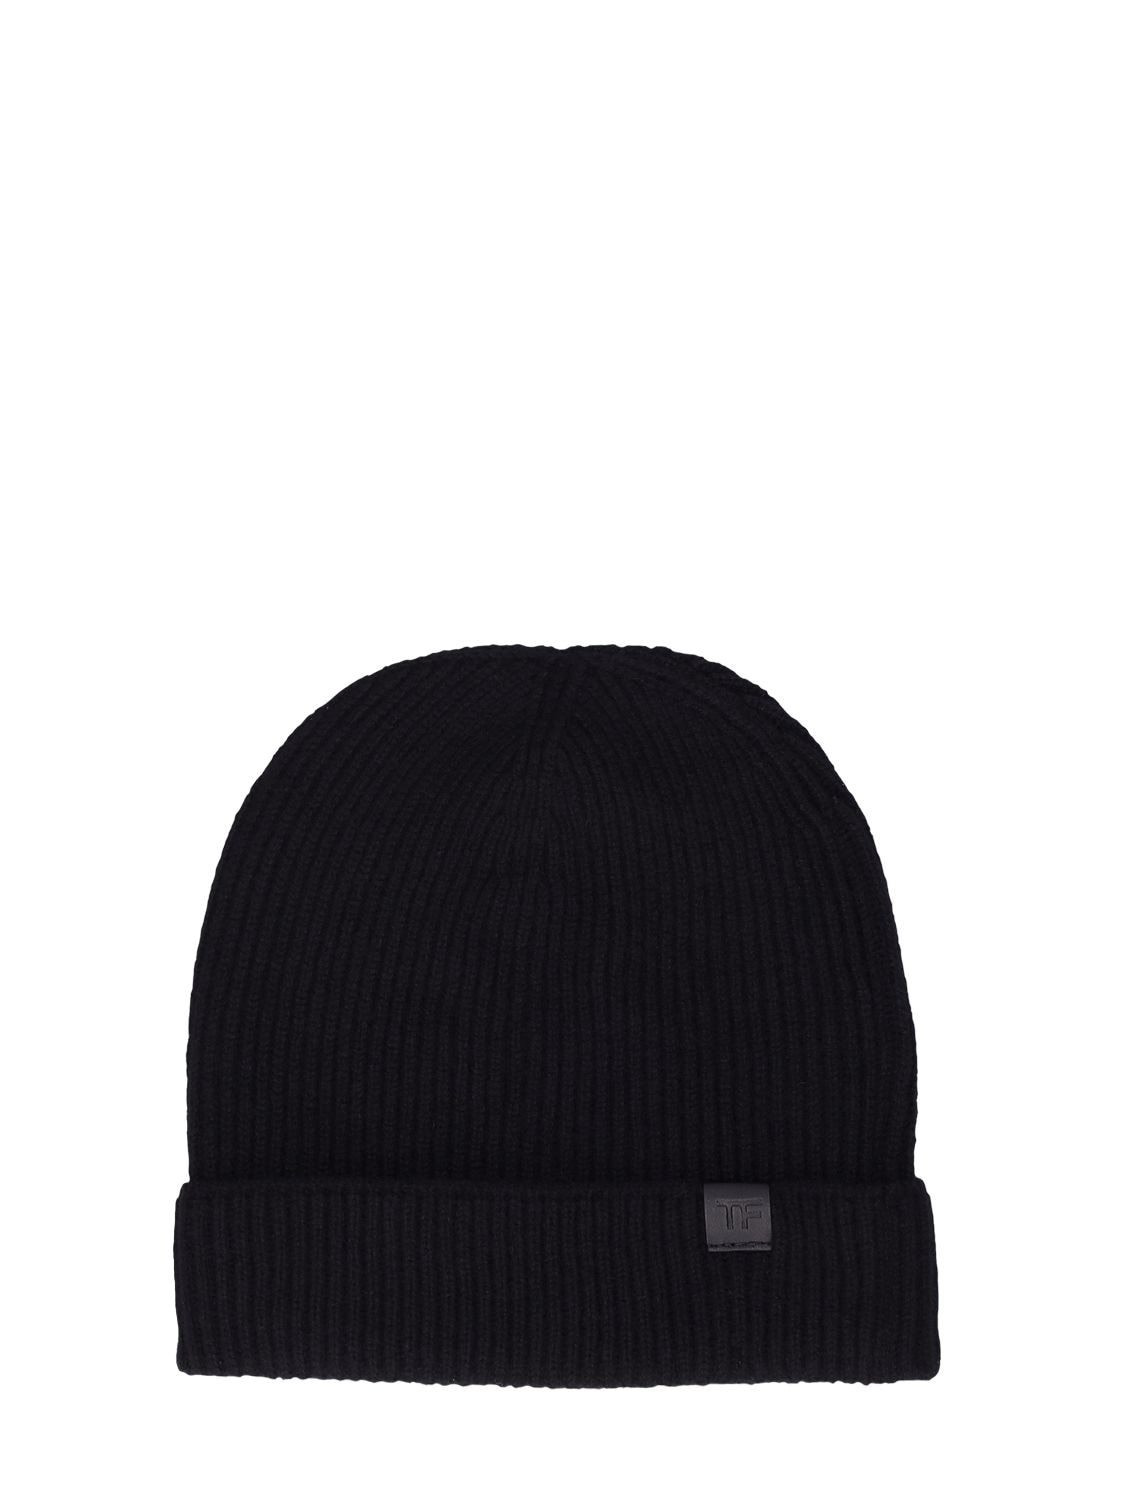 TOM FORD CASHMERE HAT